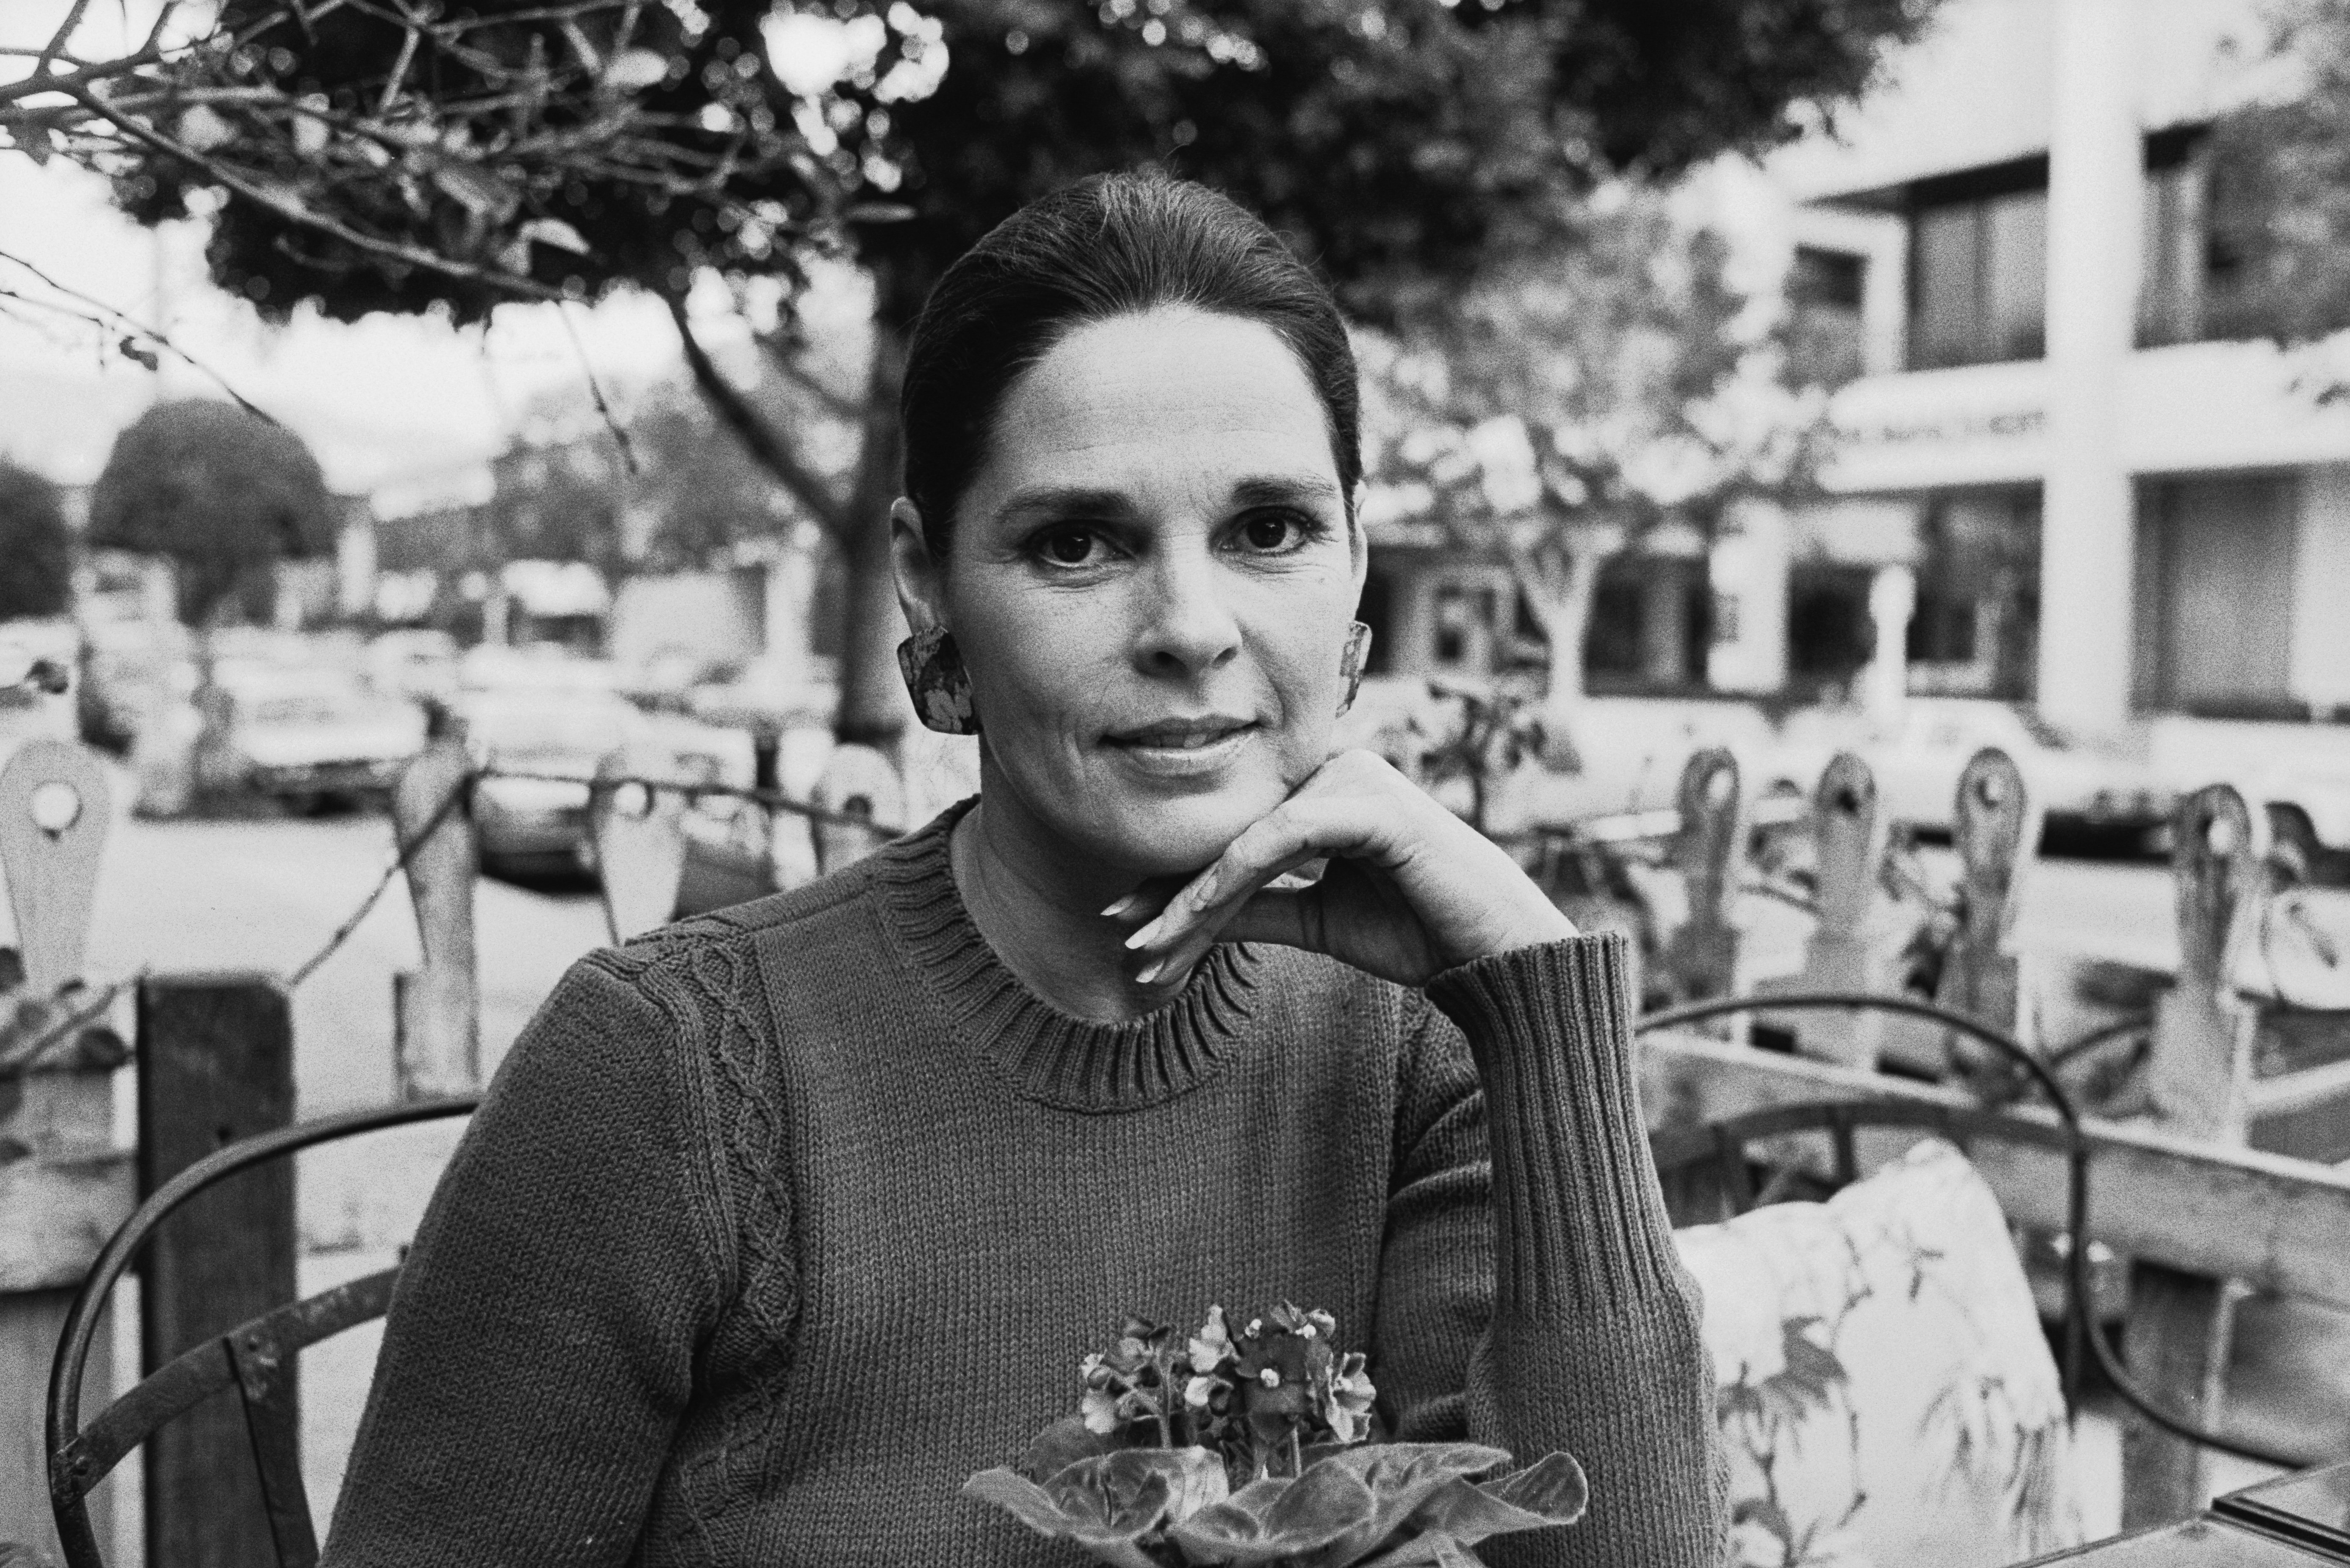 Actress Ali MacGraw, wearing a knitted jumper, as she supports her chin on her hand, 6th February 1985. | Photo: Getty Images